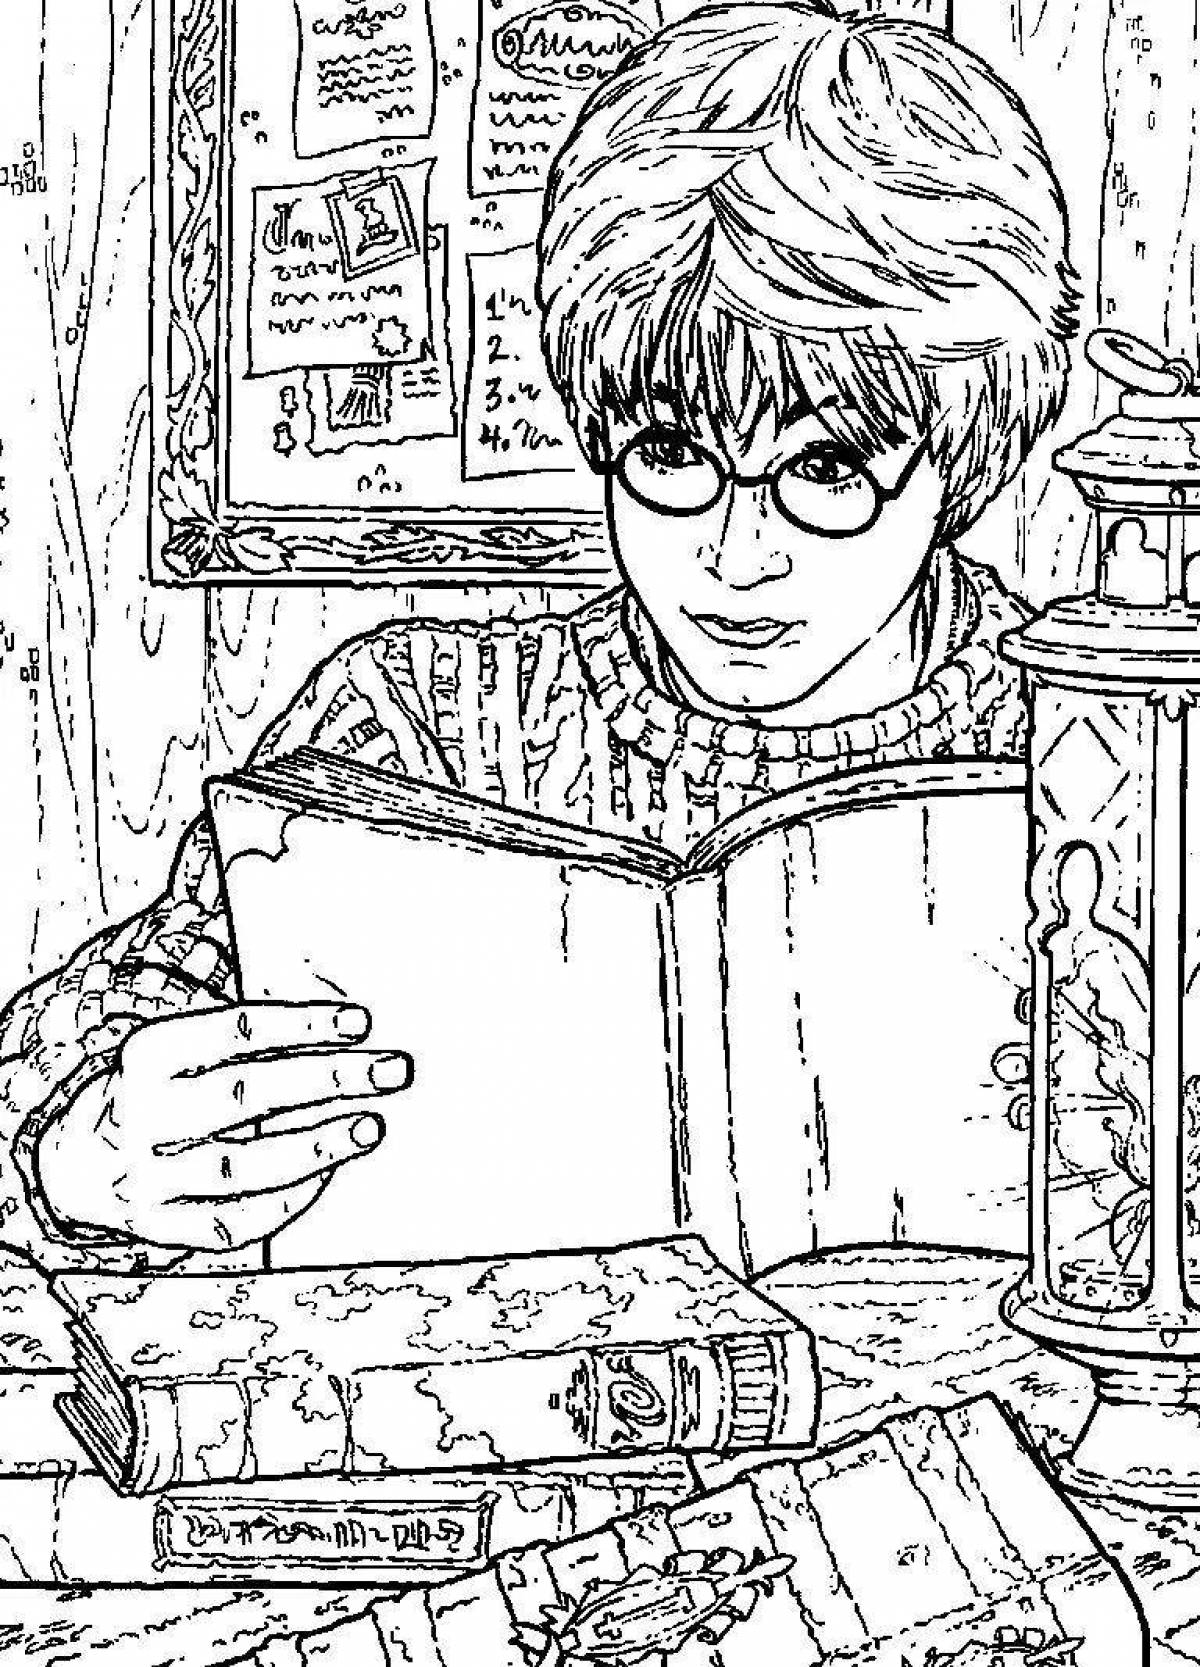 Harry potter drawing #3